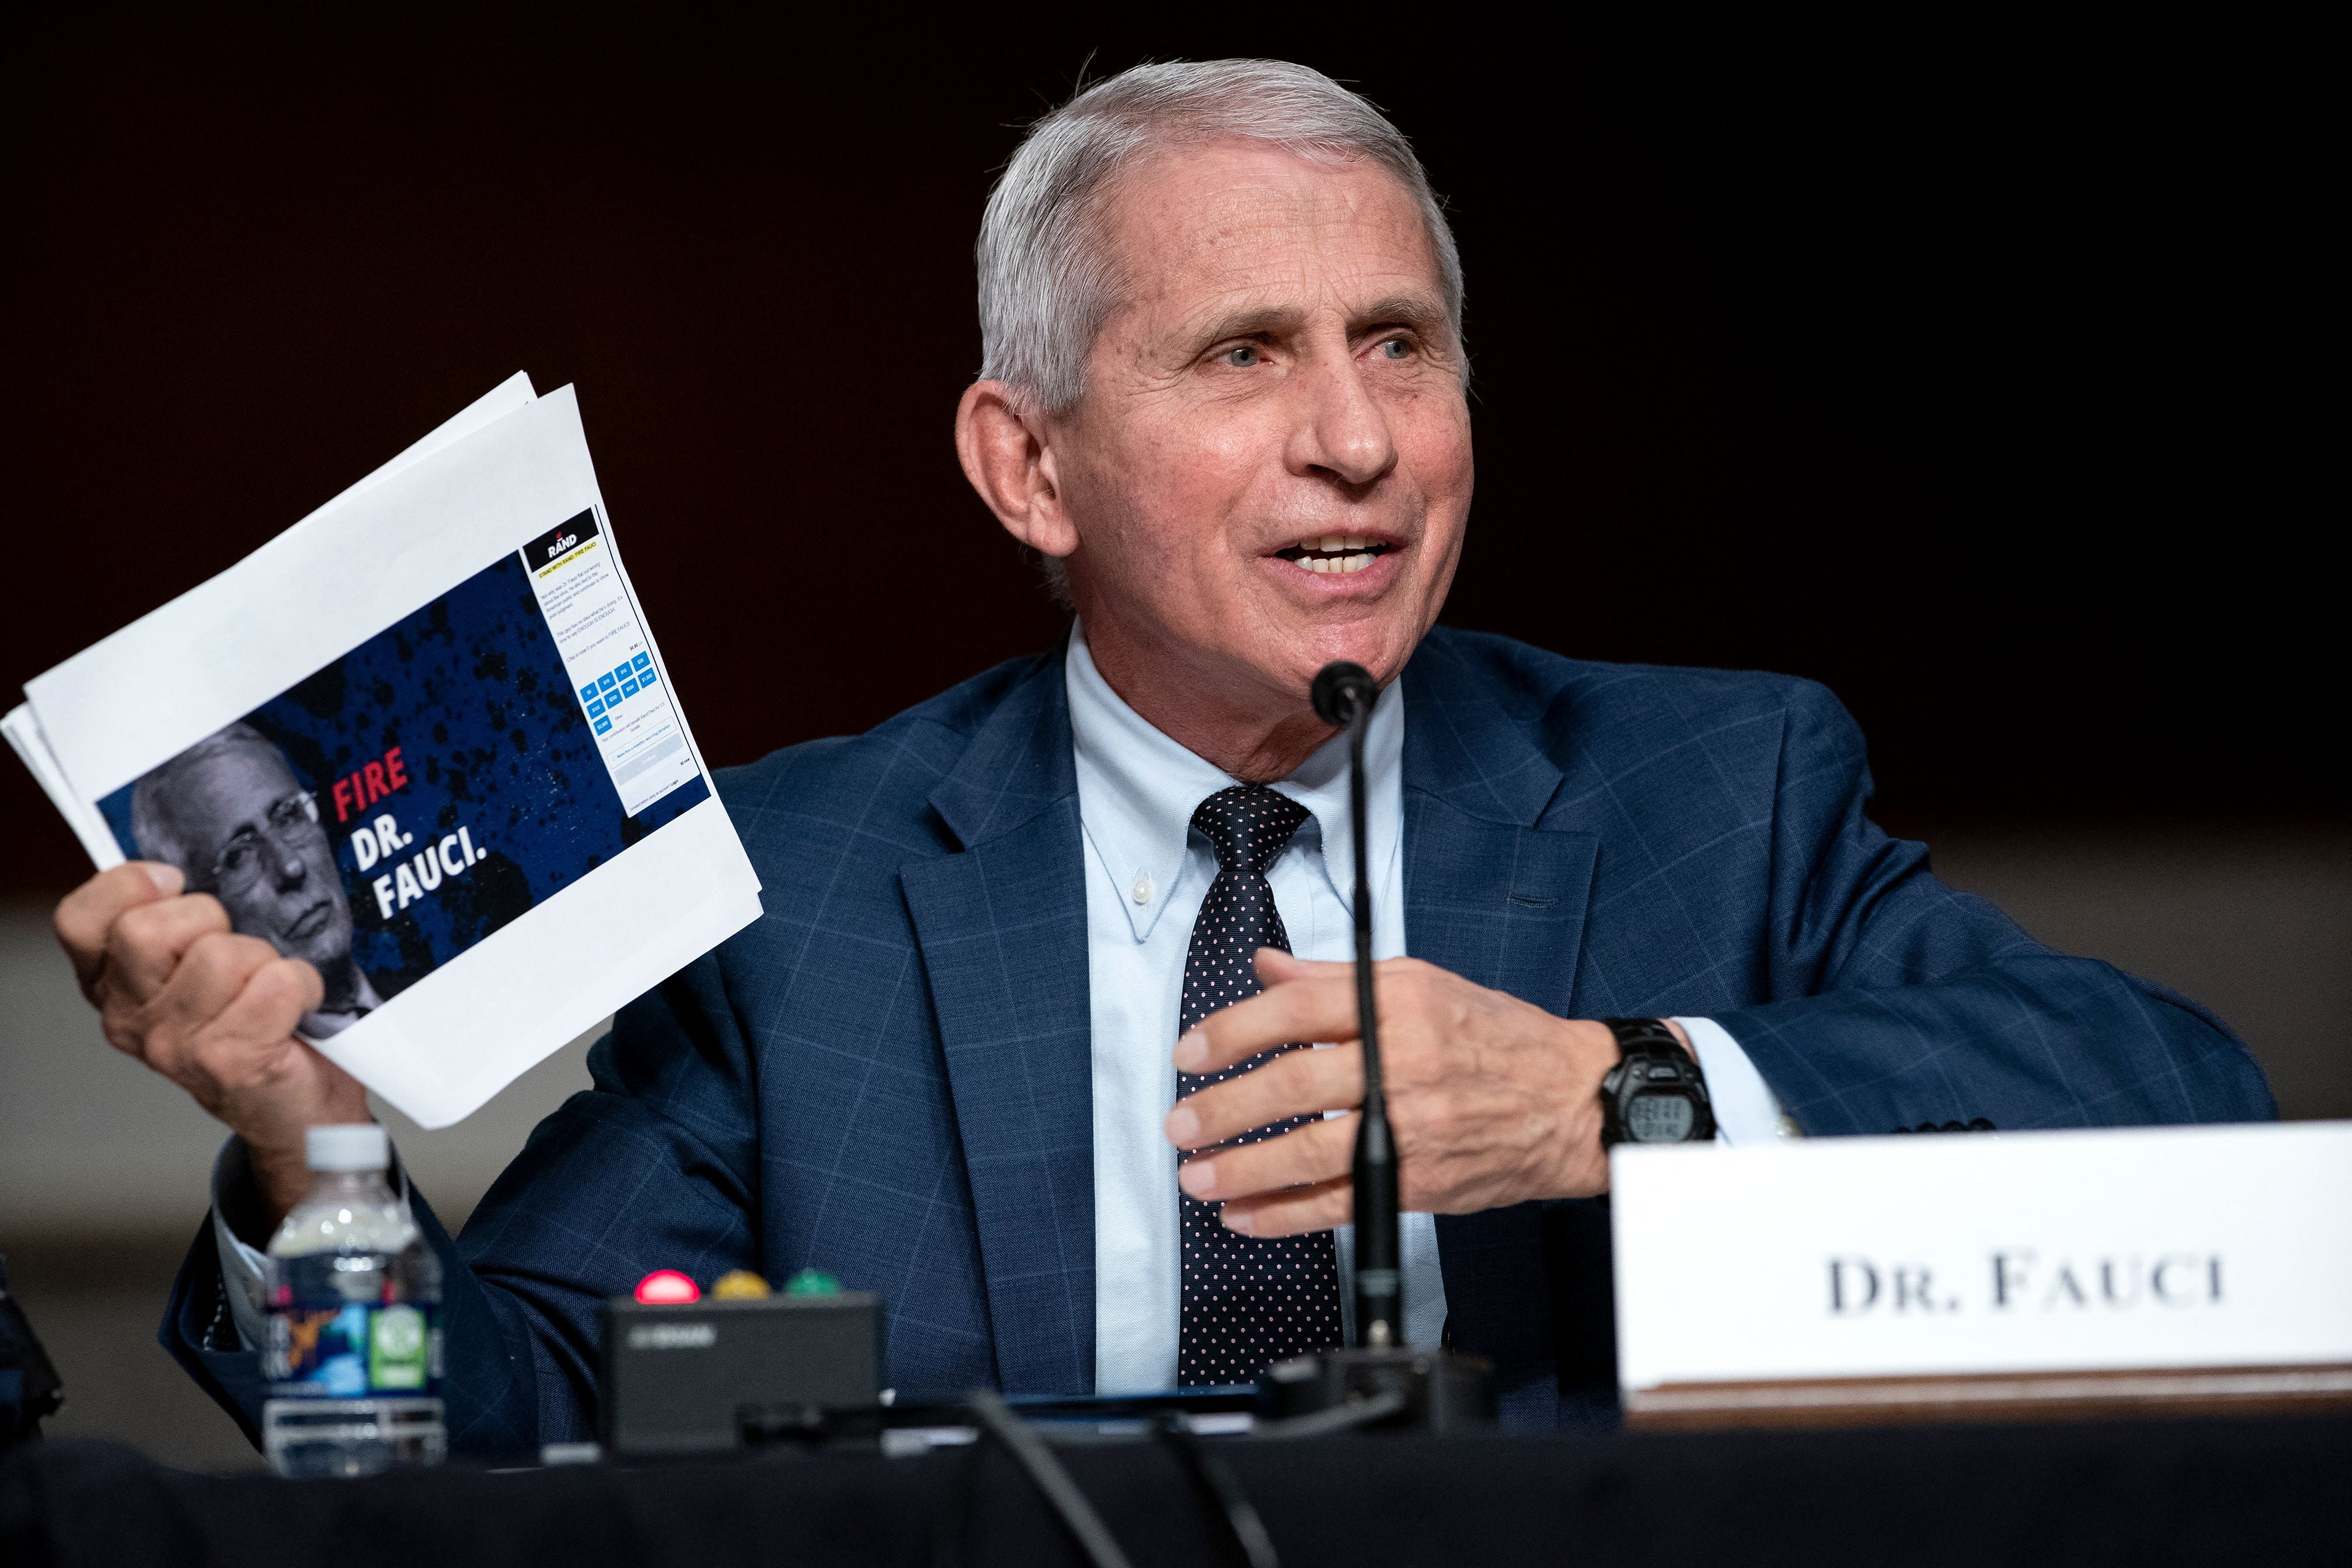 Among those Mr Kennedy has attacked are Dr Anthony Fauci, the White House’s chief medical adviser